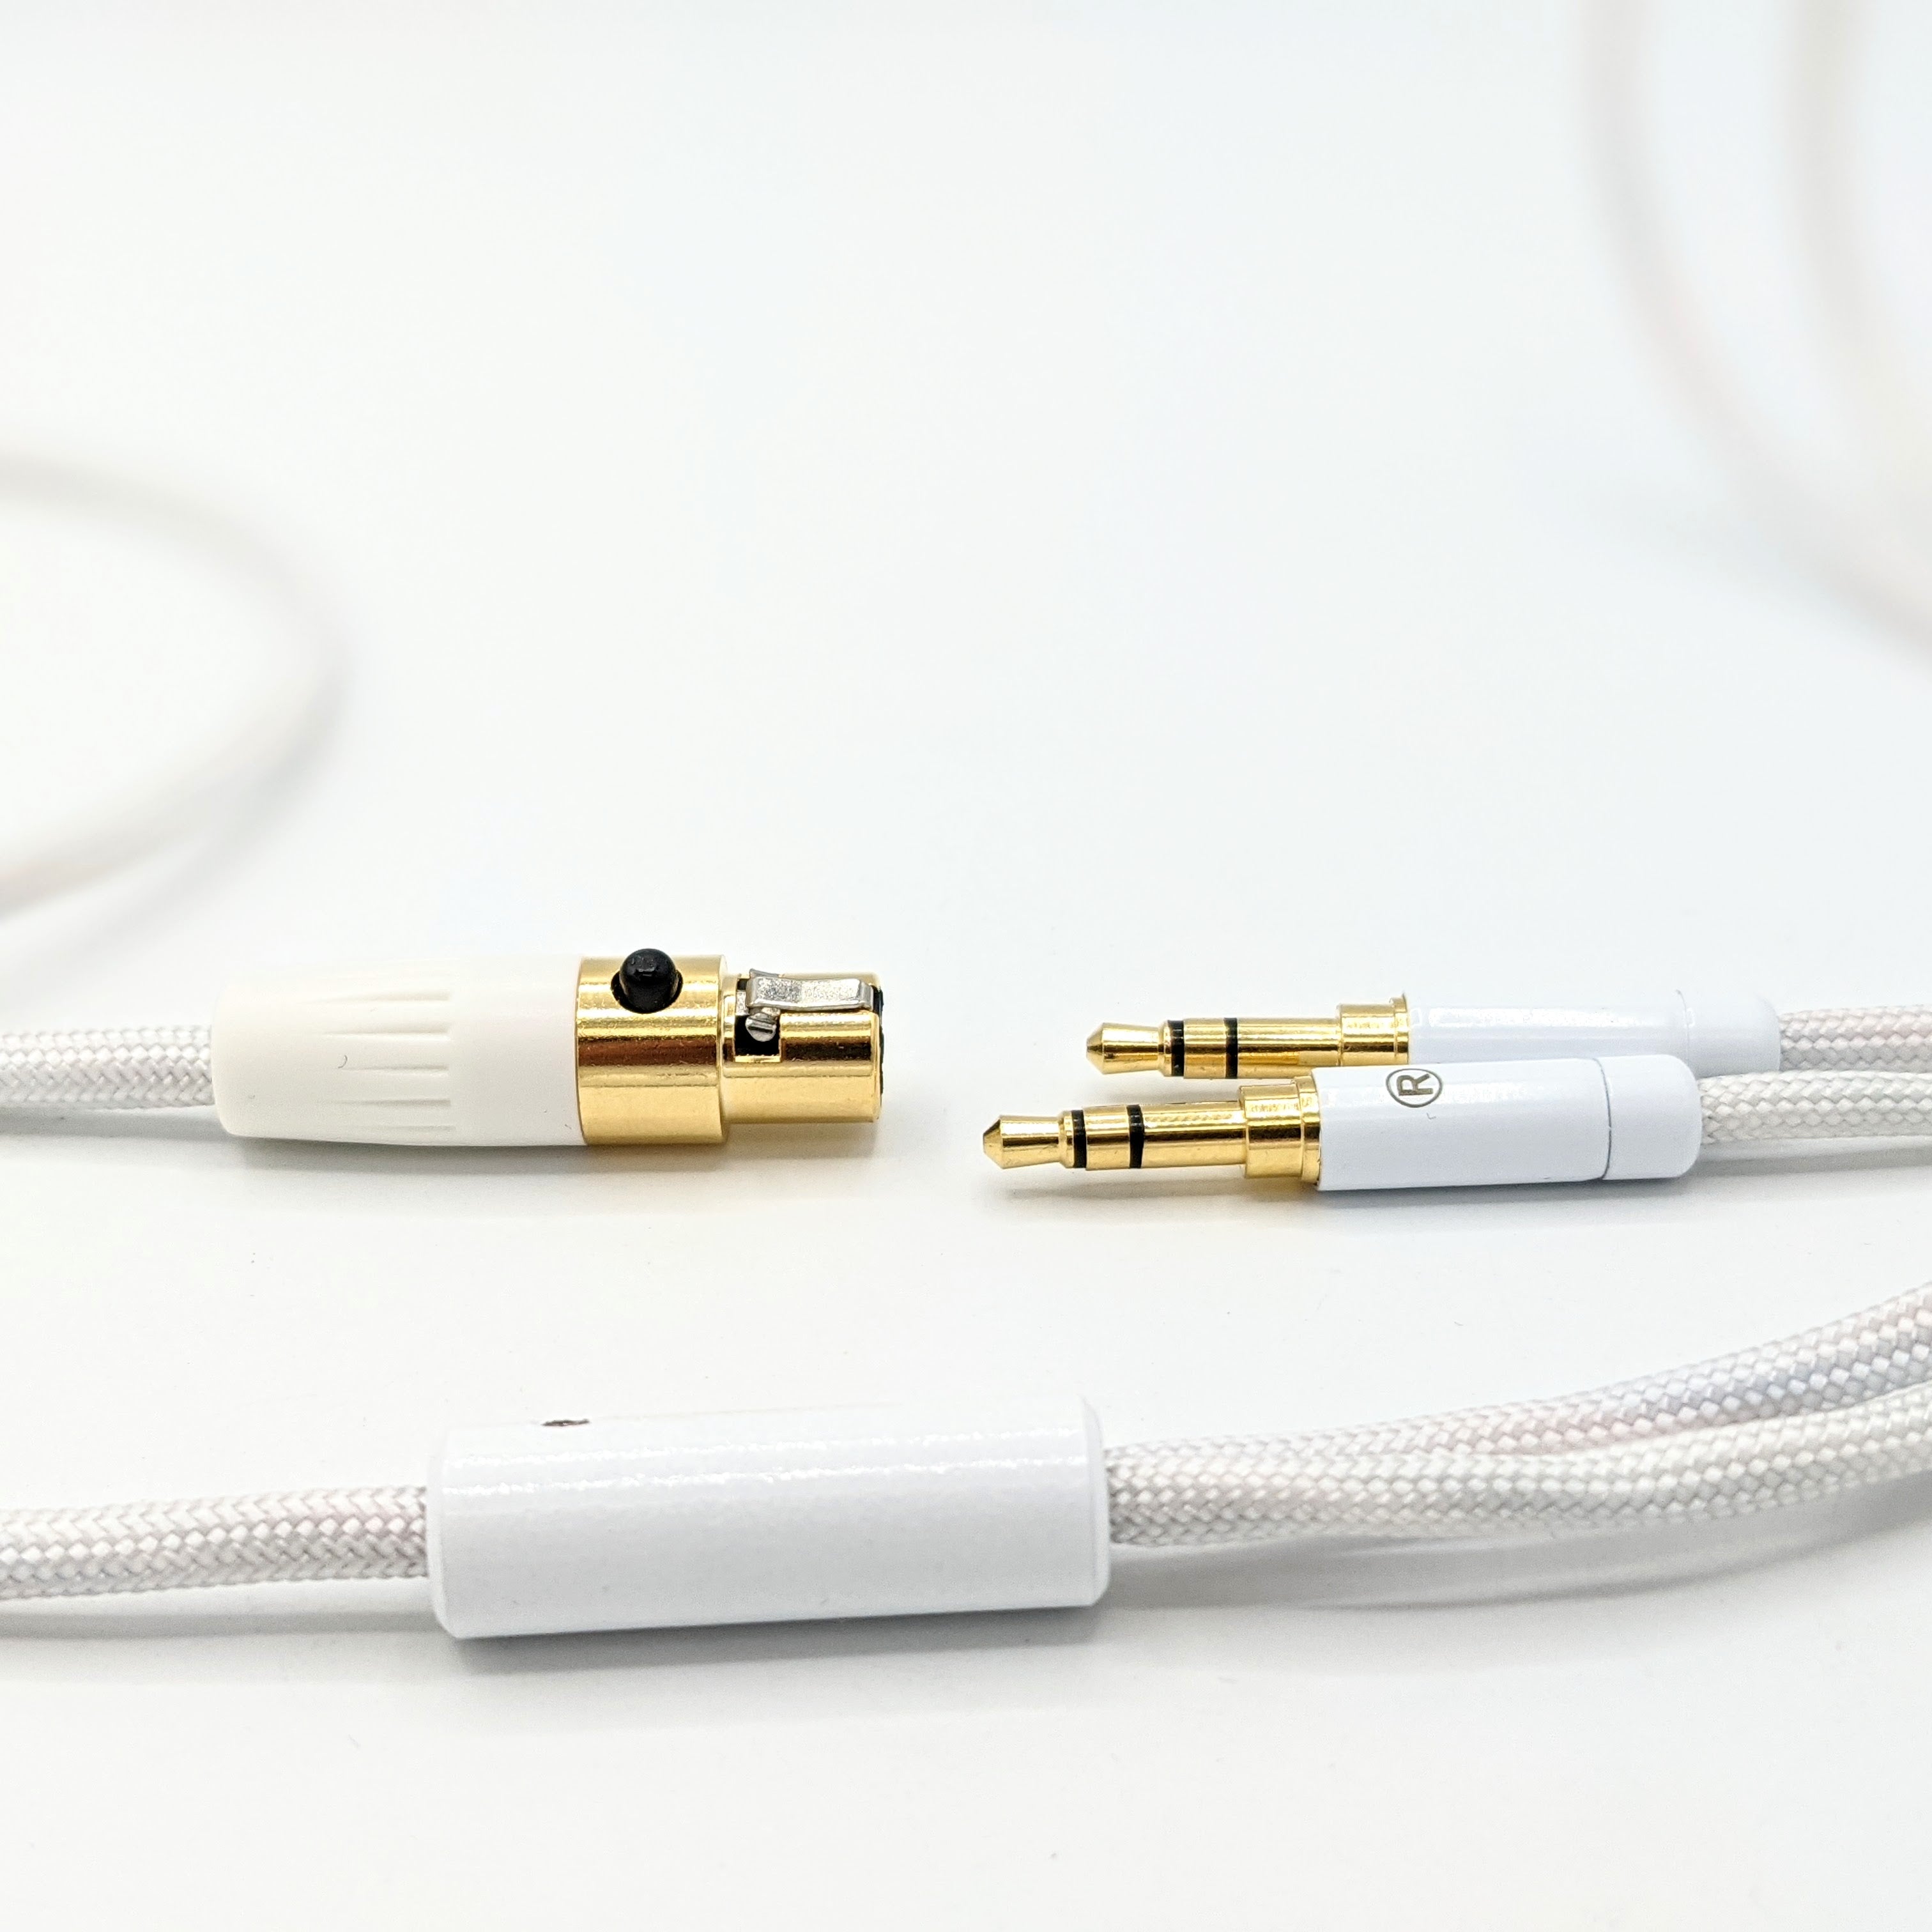 "Whiteout" HC-9 Dual 3.5mm TRS Headphone Cable